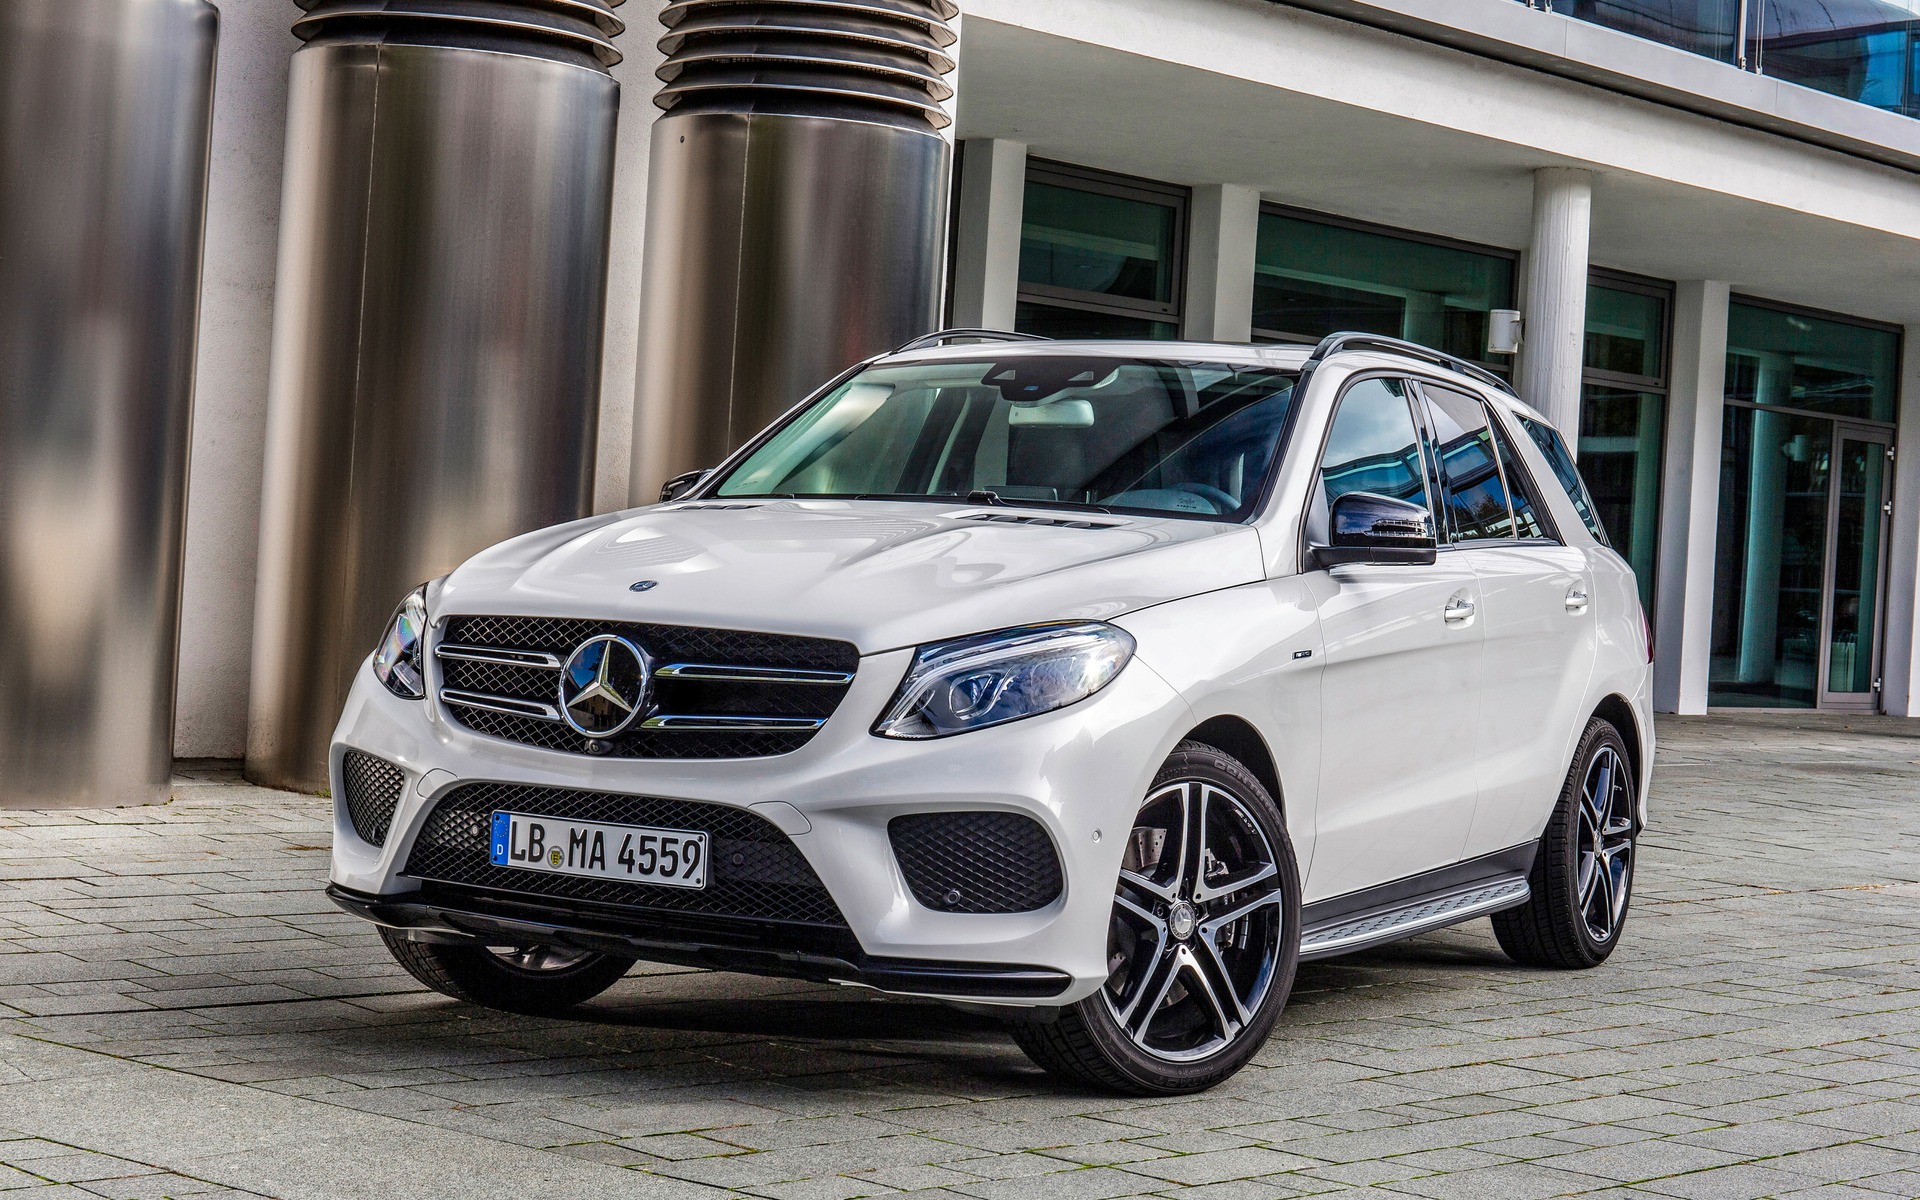 17 Mercedes Benz Gle News Reviews Picture Galleries And Videos The Car Guide